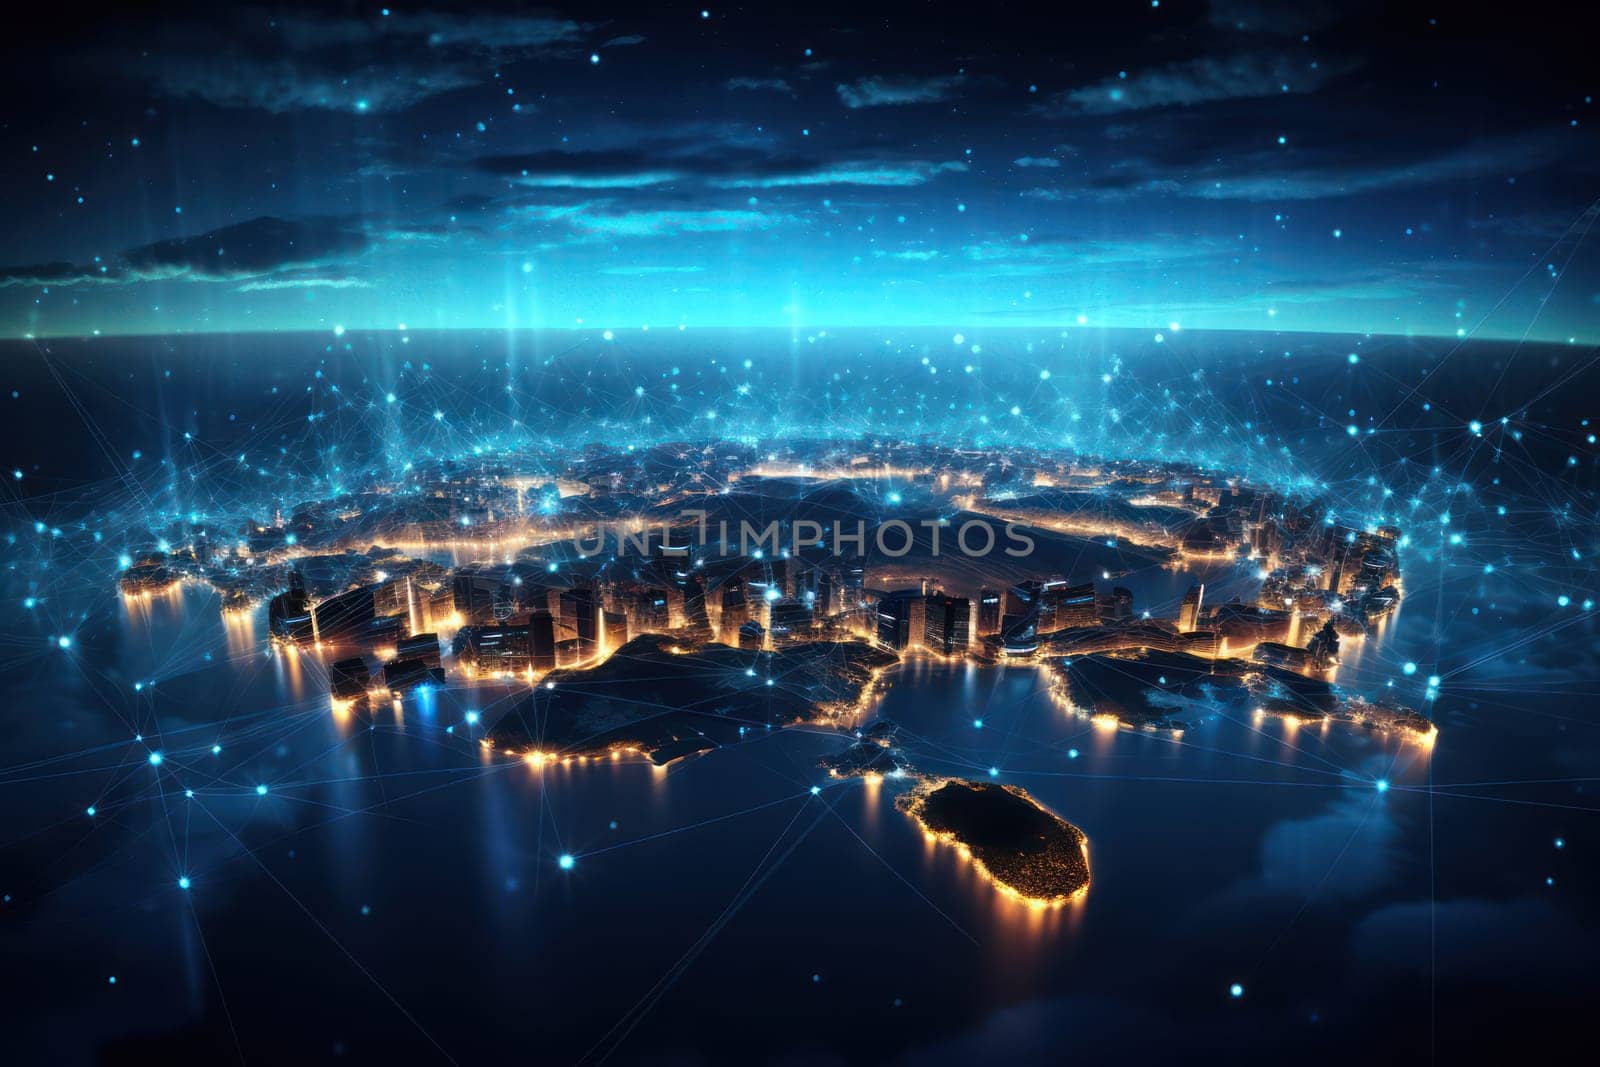 Global City Lights: Interconnected Network of Digital Business and Technology in the Modern World by Vichizh